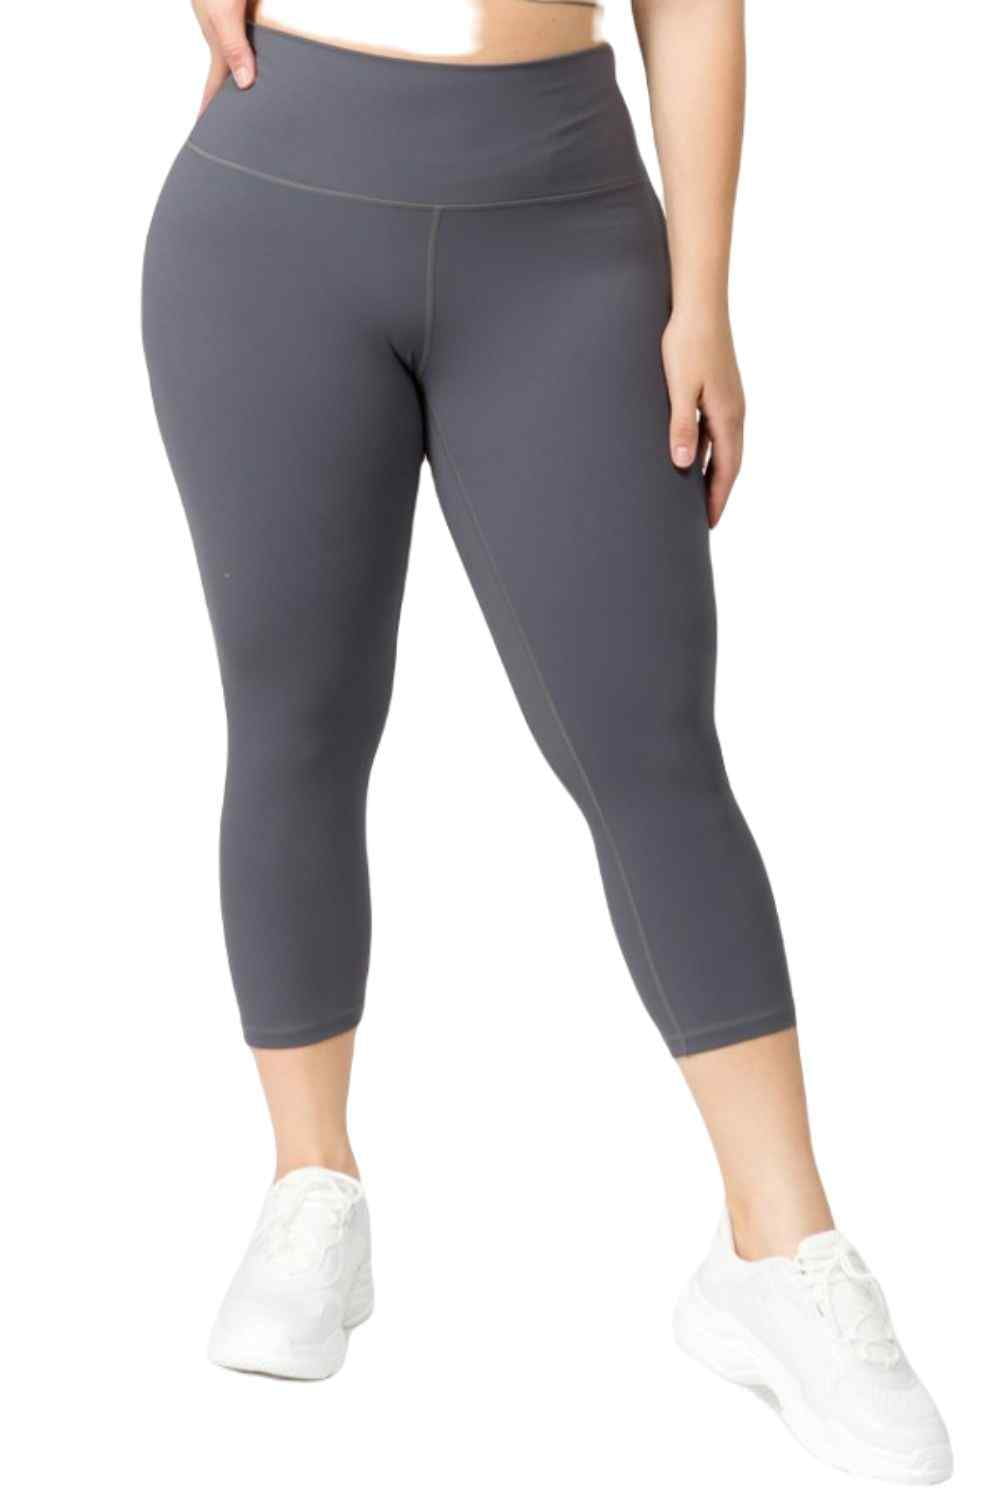 Women's Plus Size Active Buttery Soft Capri Leggings. • Wide, high rise  waistband lies flat against your skin • Ultra buttery soft fabrication •  Interior waistband pocket can hold keys, cards, cash •